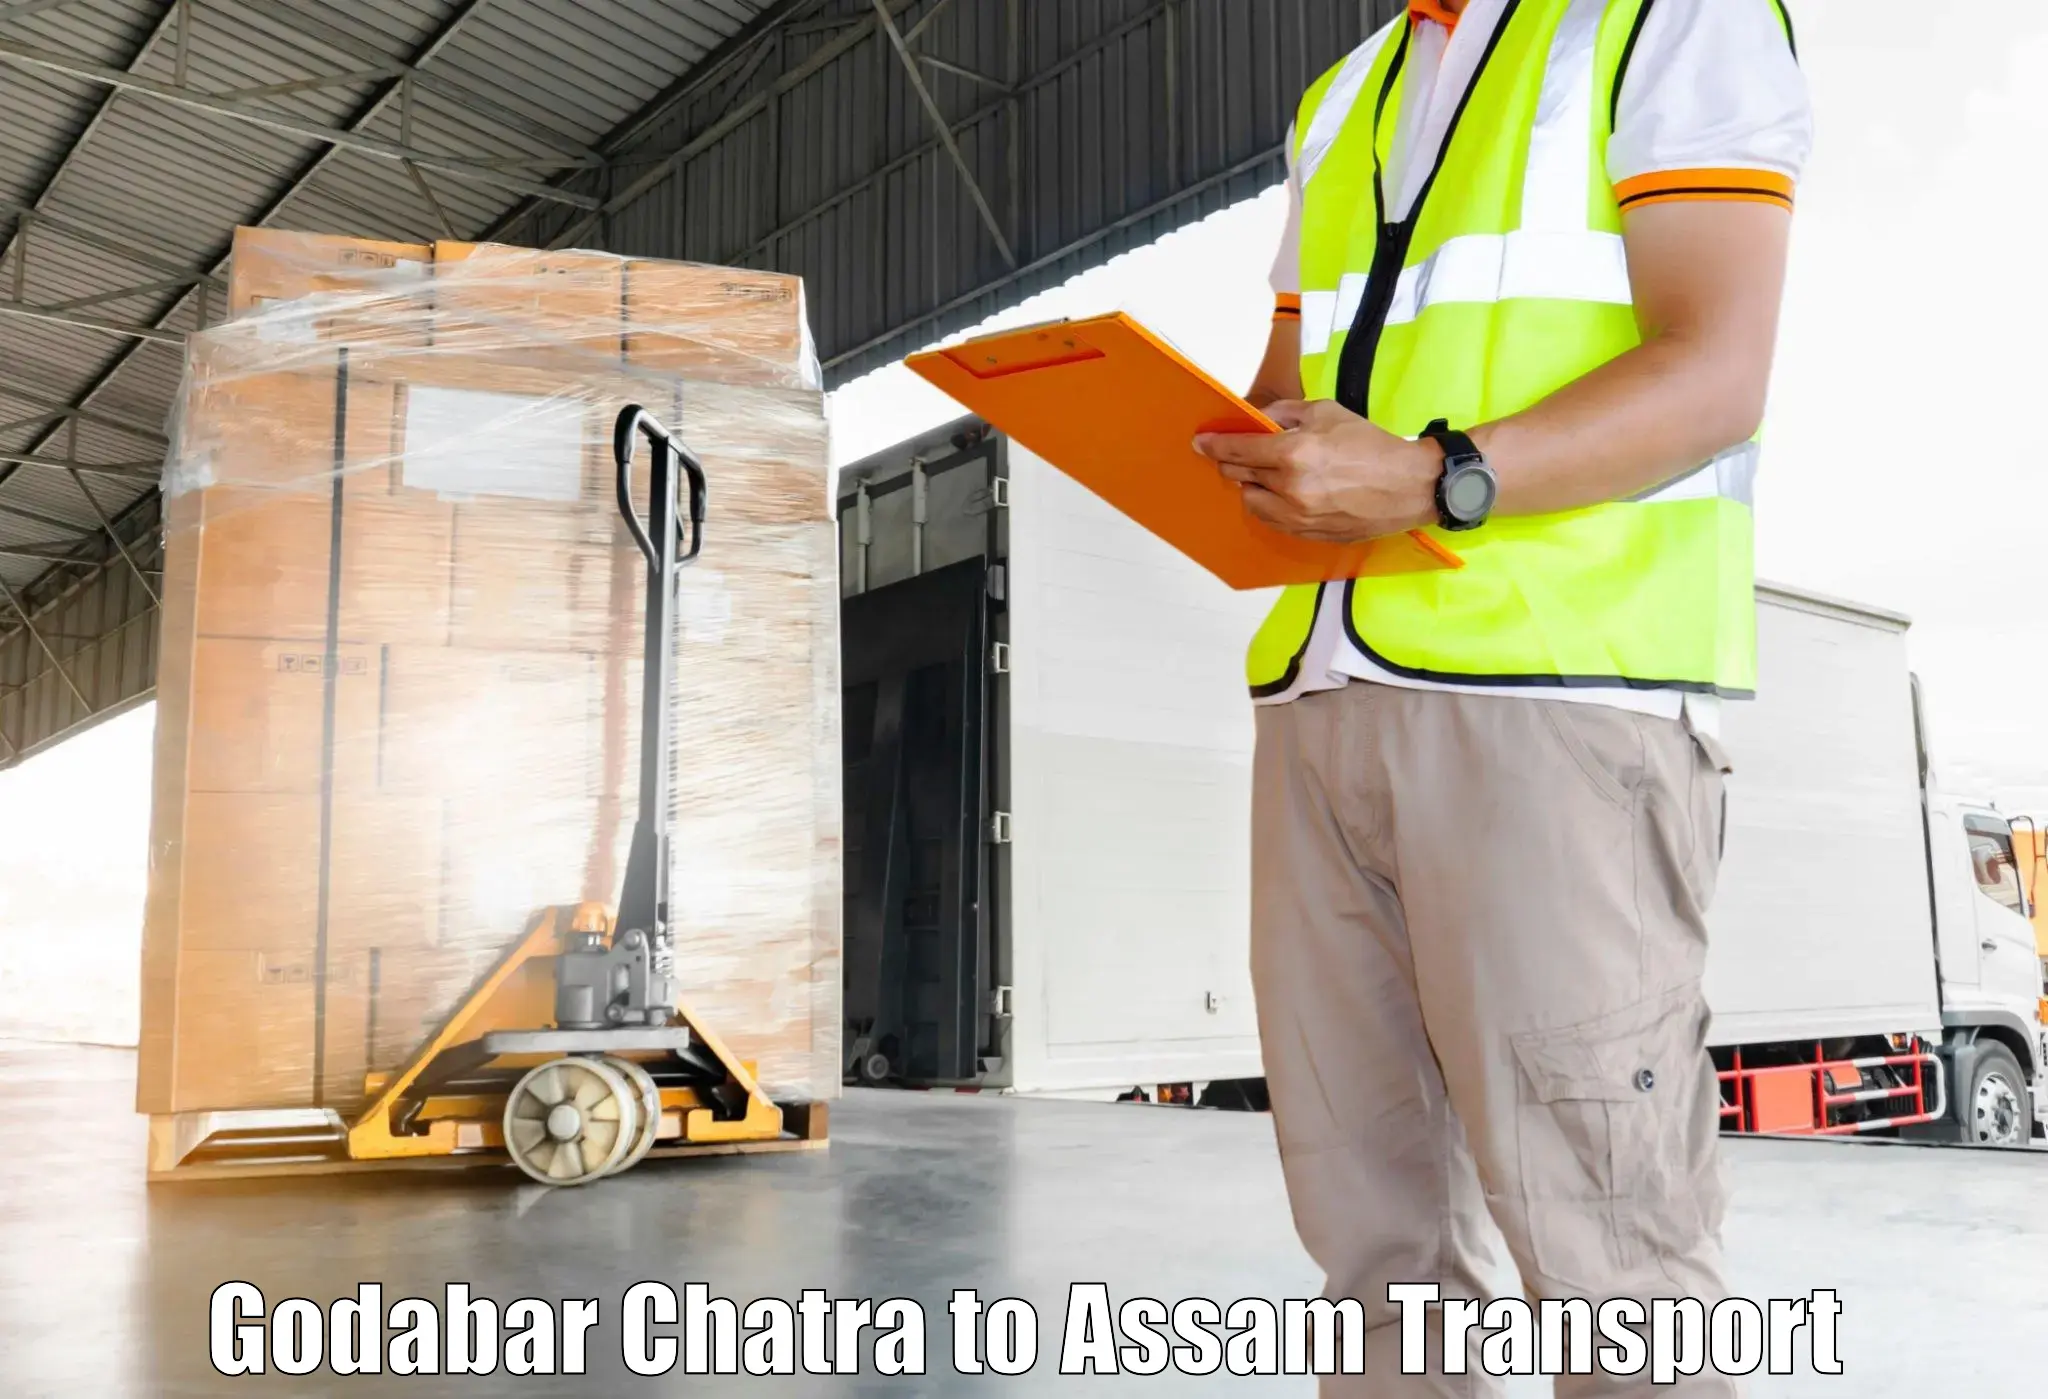 Truck transport companies in India Godabar Chatra to Lakhipur